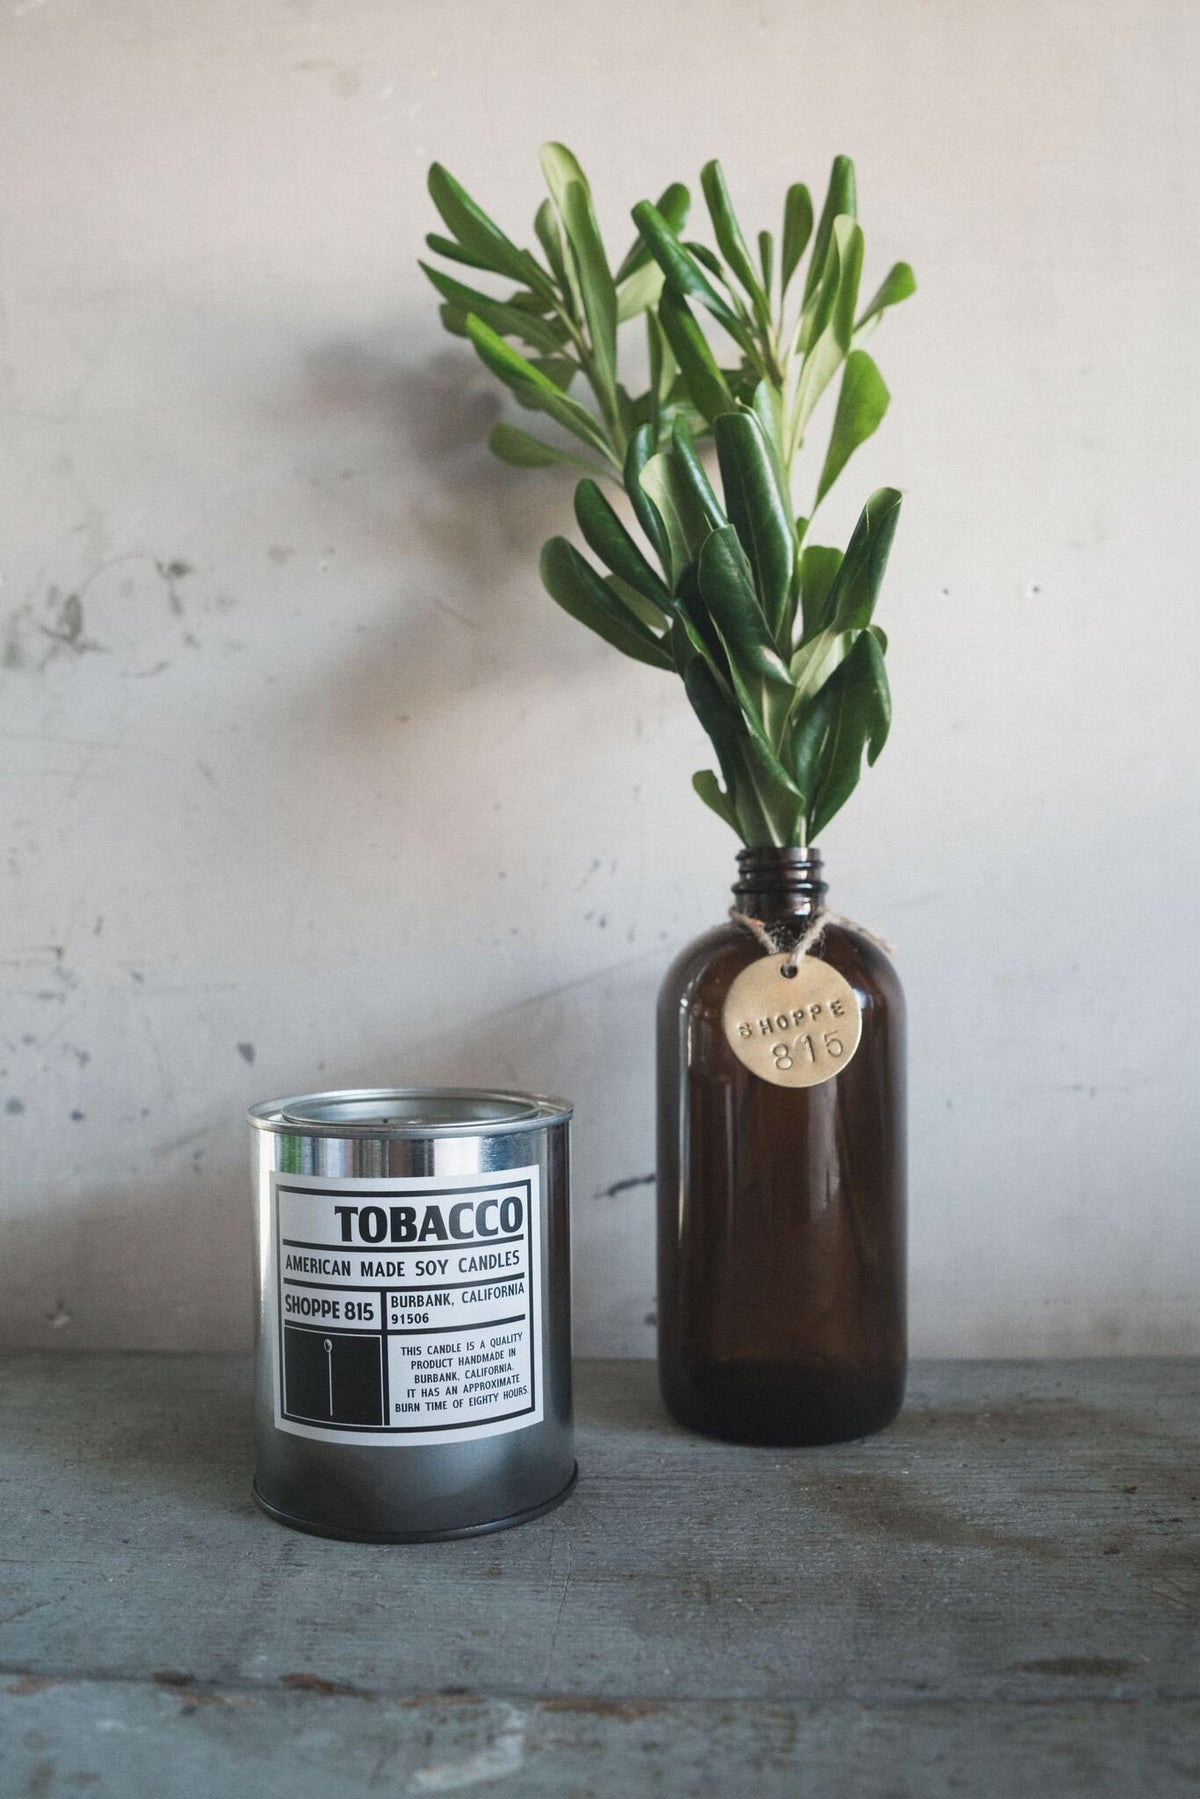 Tobacco Soy Candle in a Tin Can with Glass Bottle and Plant for Decor